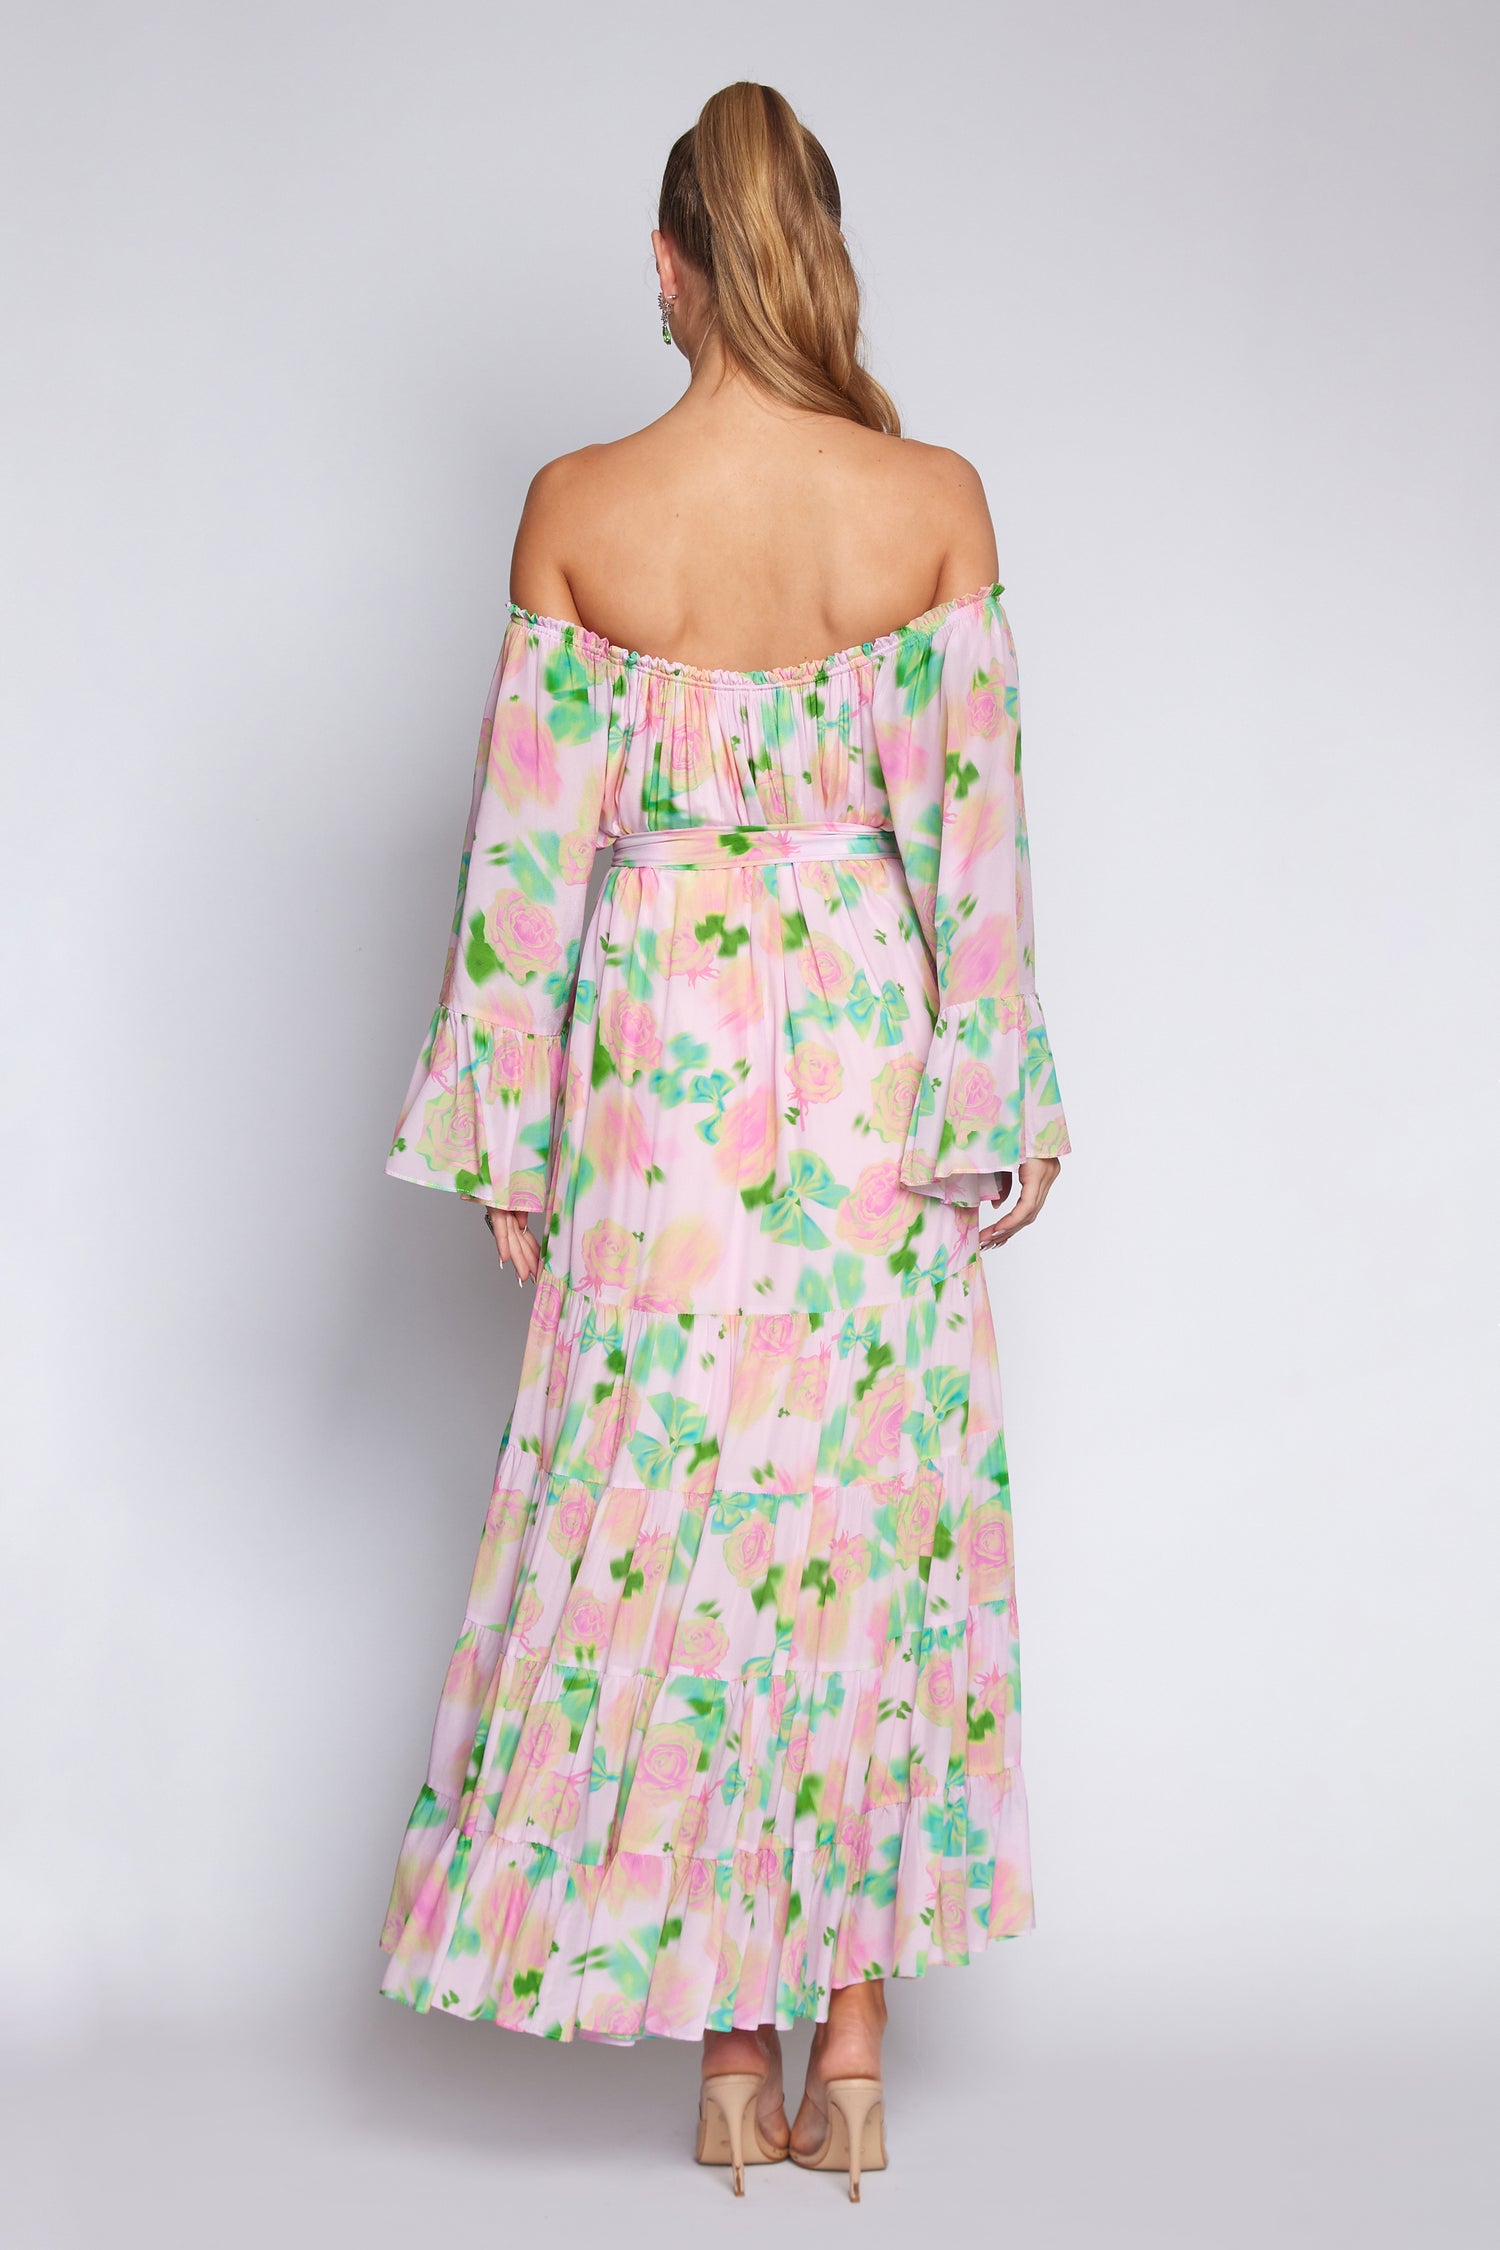 Pink/Lime Rose Gypsy dress